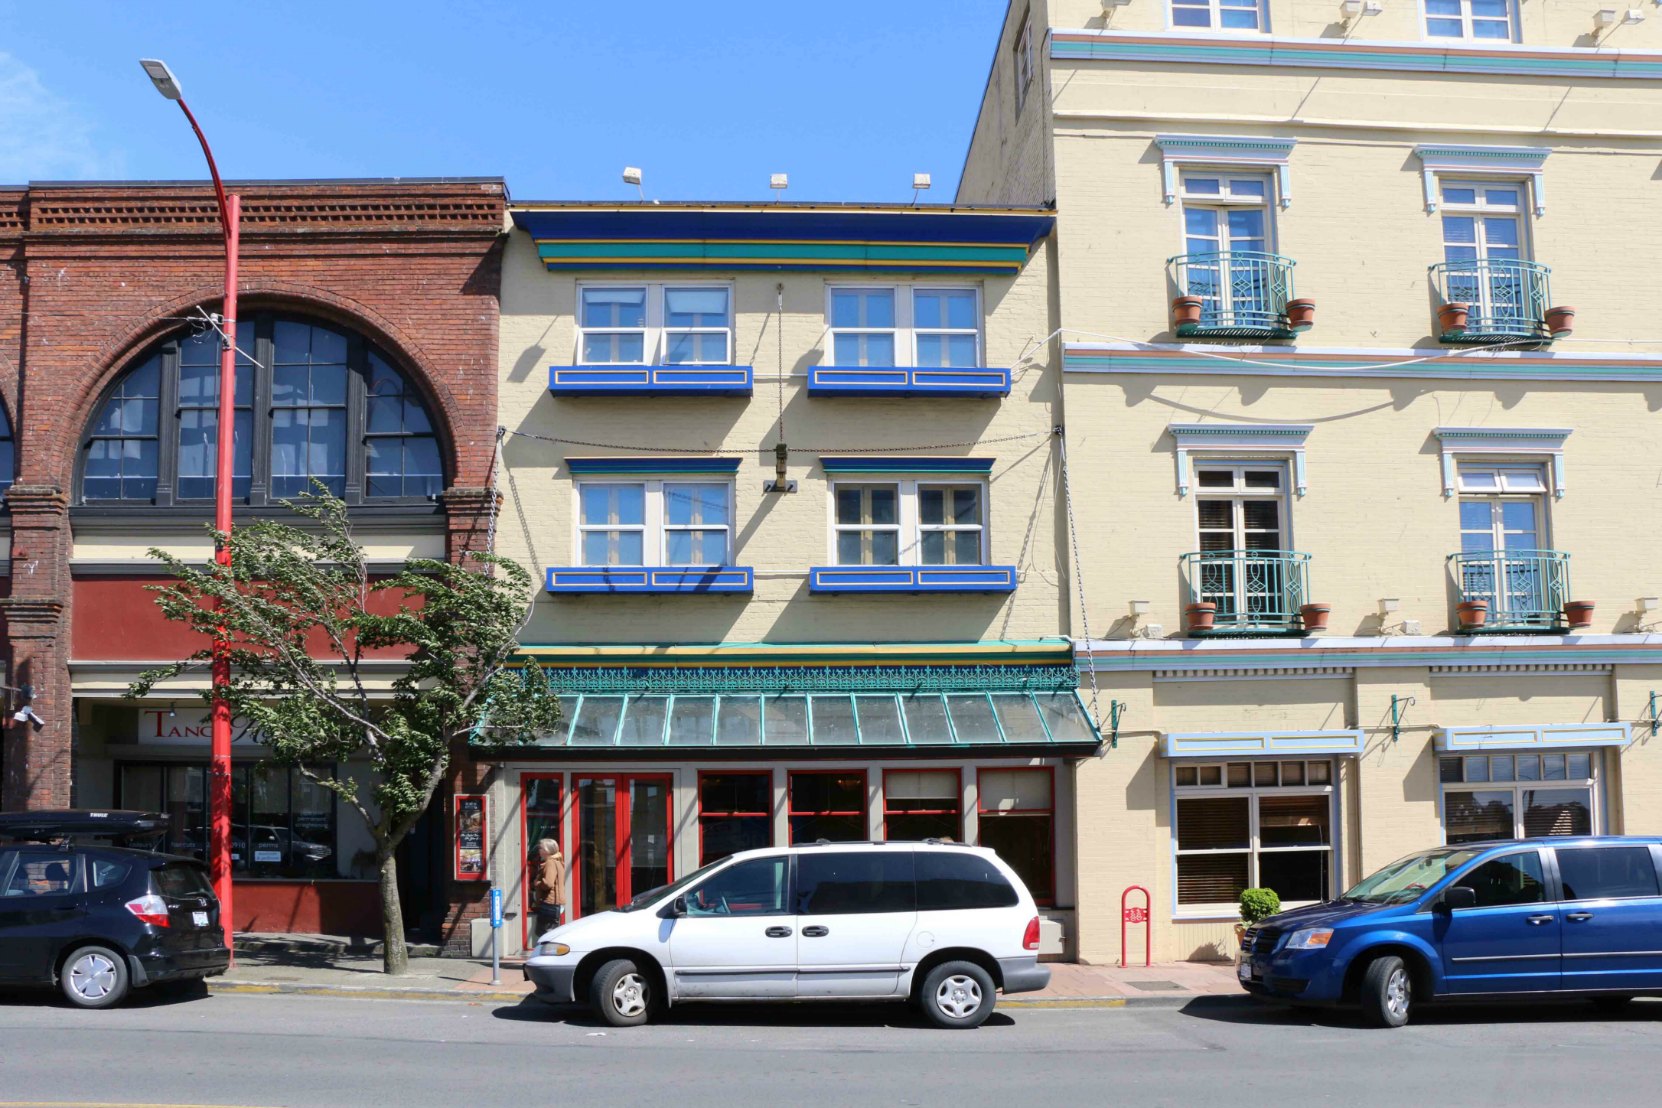 1615 Store Street, built in 1913 by architect Milo S. Farwell as a warehouse for Scott &amp; Peden, which also built the adjacent building, now Swan's Hotel & Brewpub, at 506 Pandora Avenue. (photo by Victoria Online Sightseeing Tours)